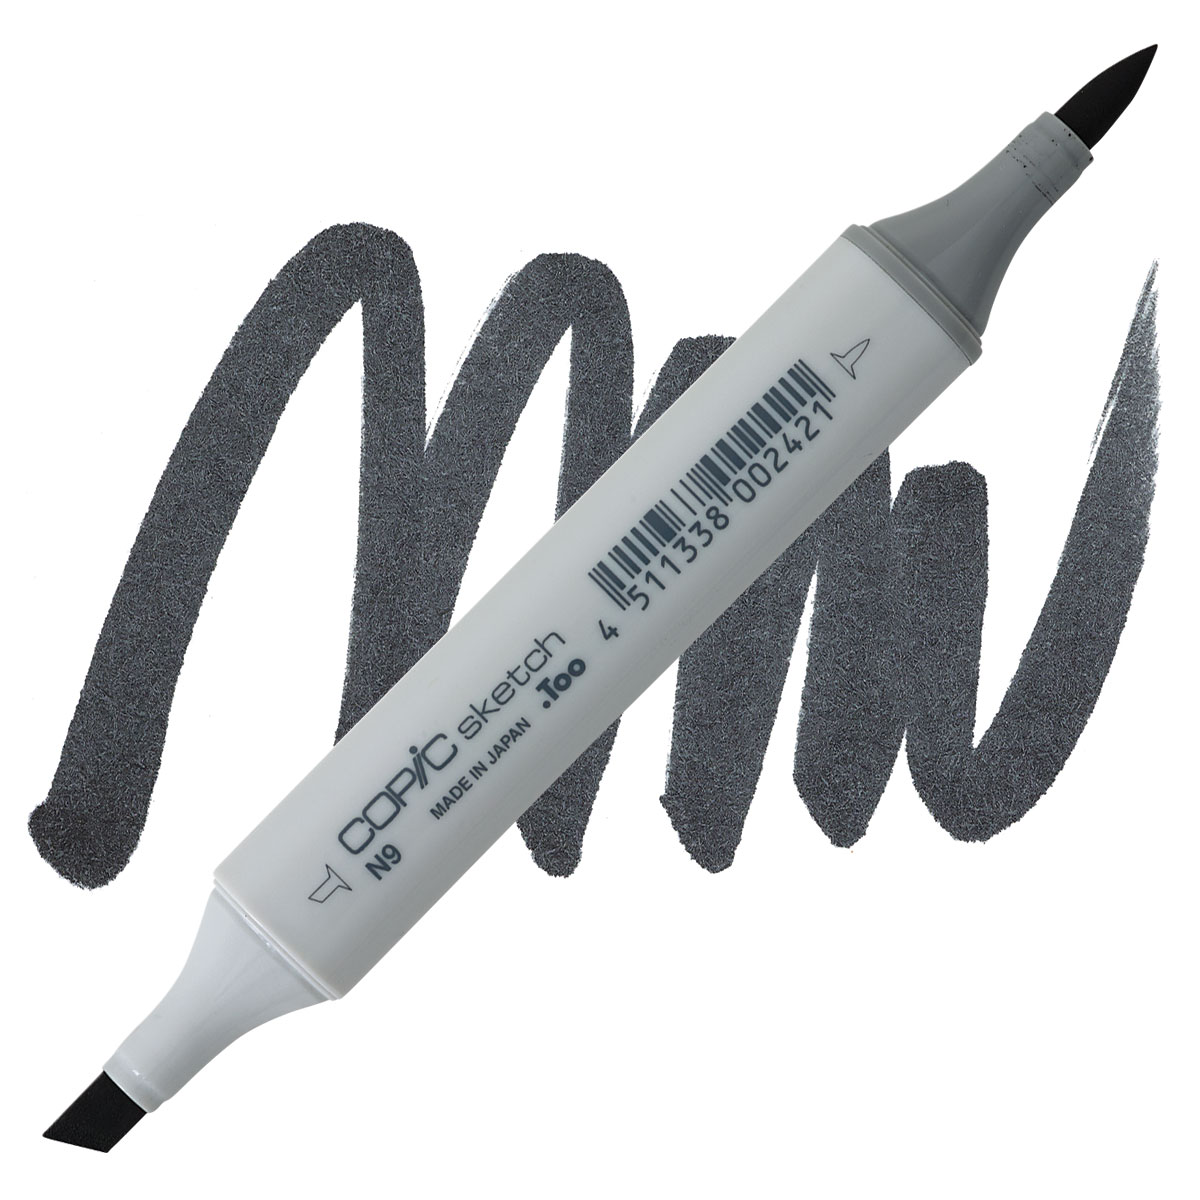 Copic Copic Sketch Marker Neutral Gray N9 4511338002421 N9 